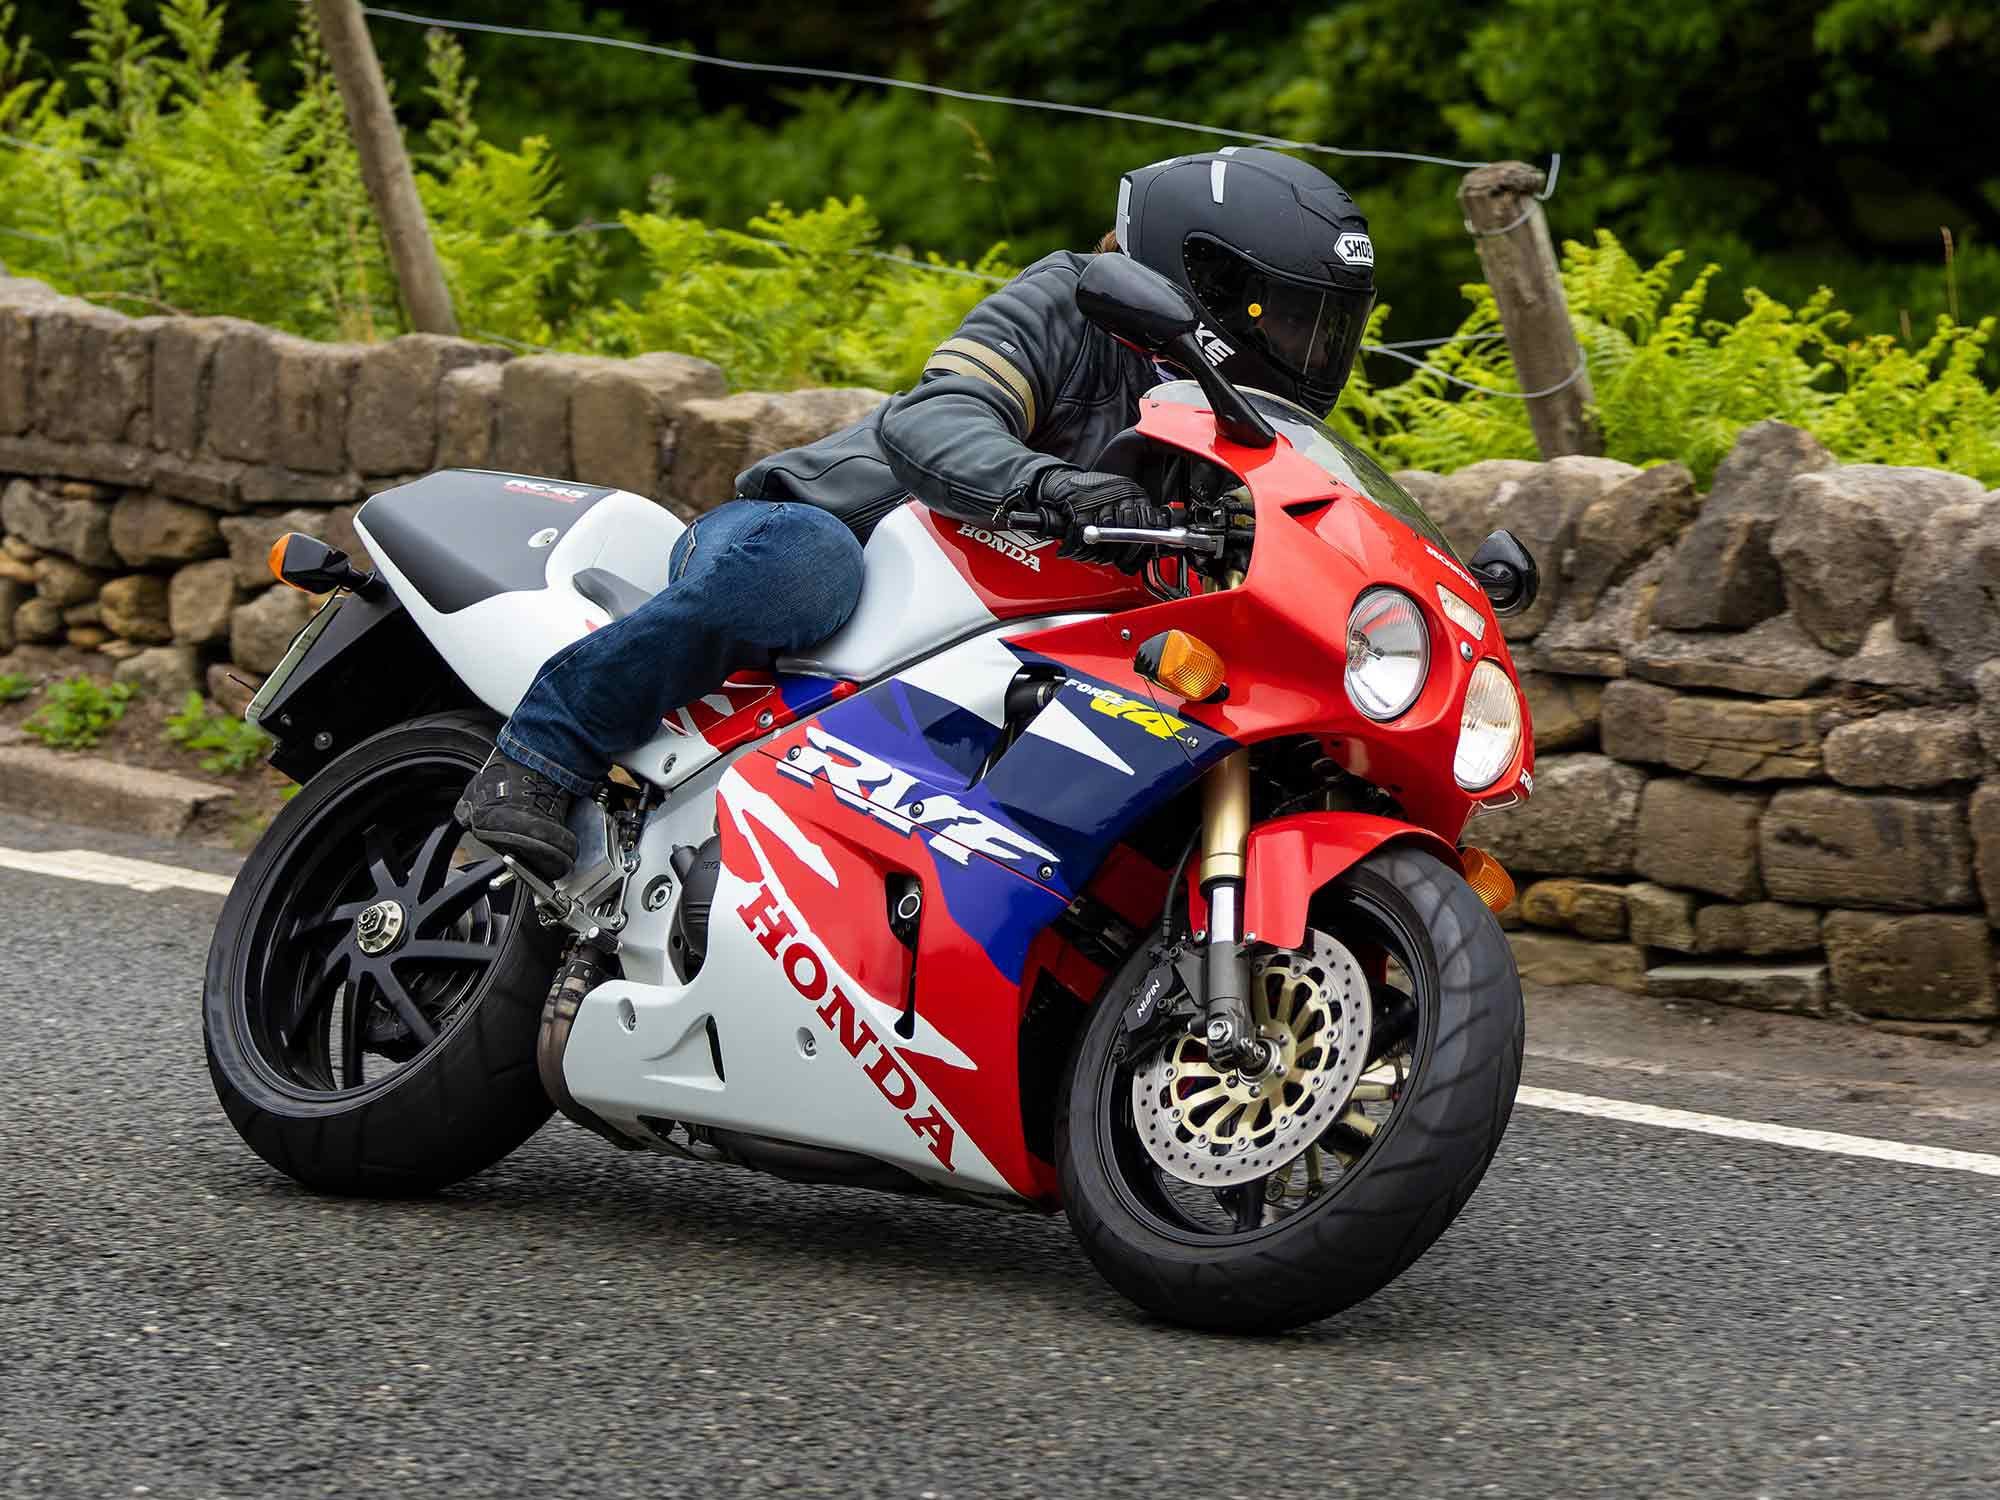 The RC45 isn't quite as responsive as modern superbikes, but it still packs a punch on the road.